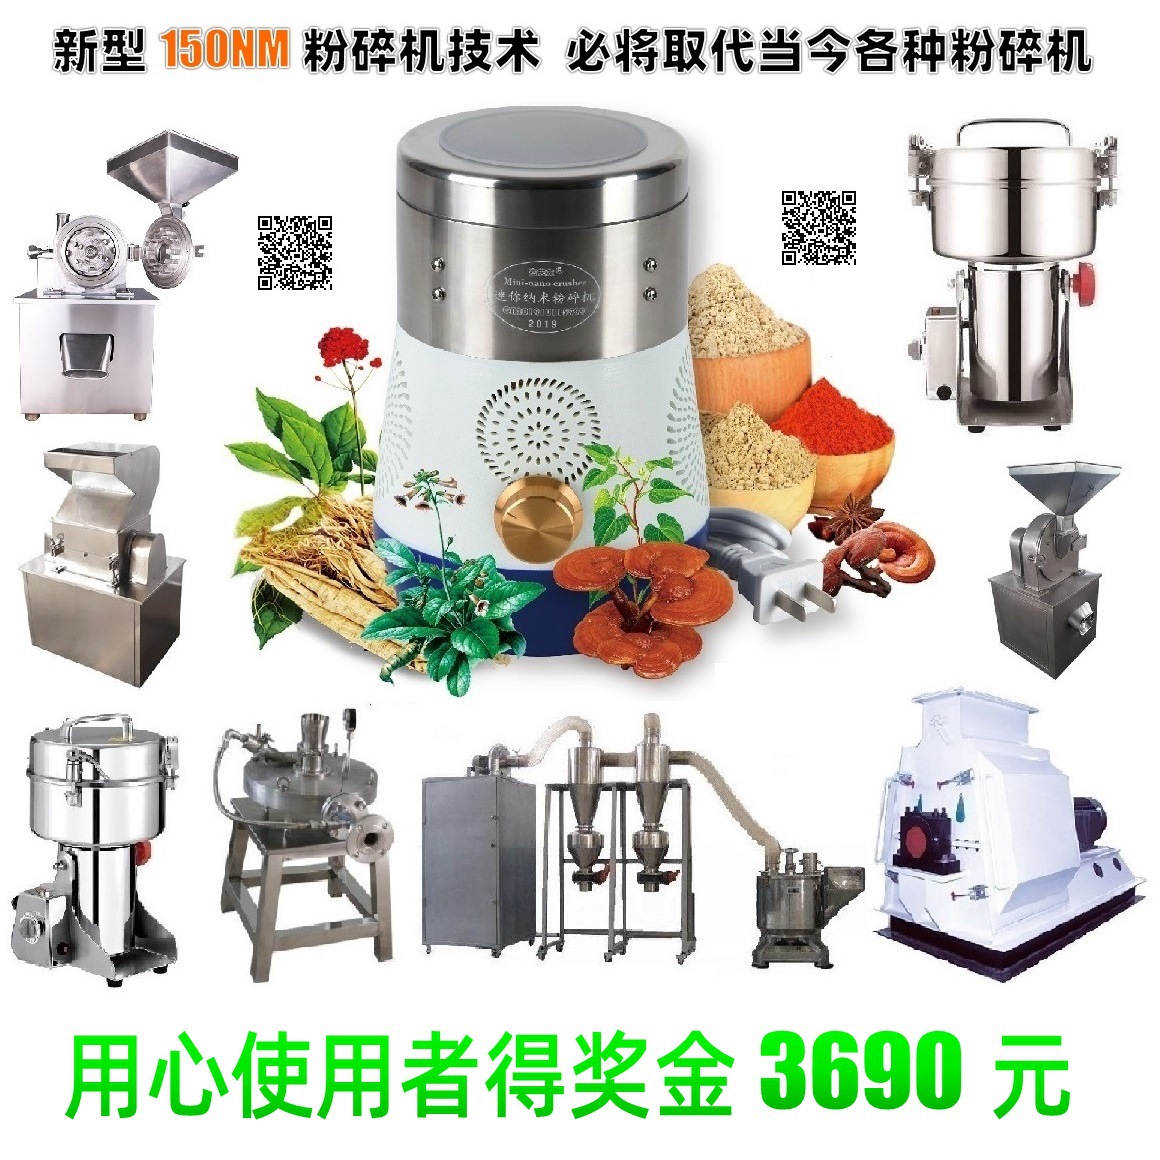 New generation Stainless steel Hailu intelligence New type Nanometer grinder Replace today Various Shredder factory Direct selling